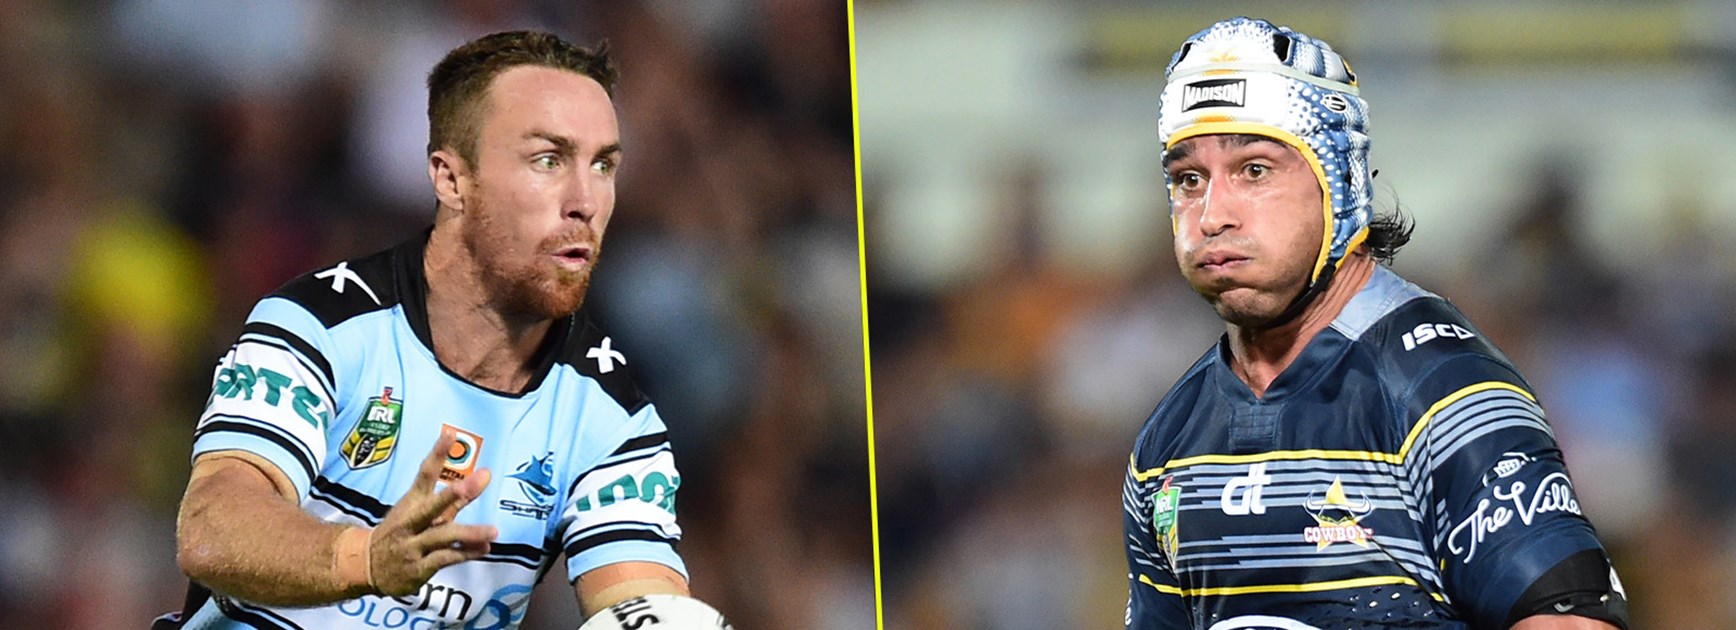 They faced off at State of Origin, but who will be victorious between James Maloney and Johnathan Thurston when the Sharks host the Cowboys?